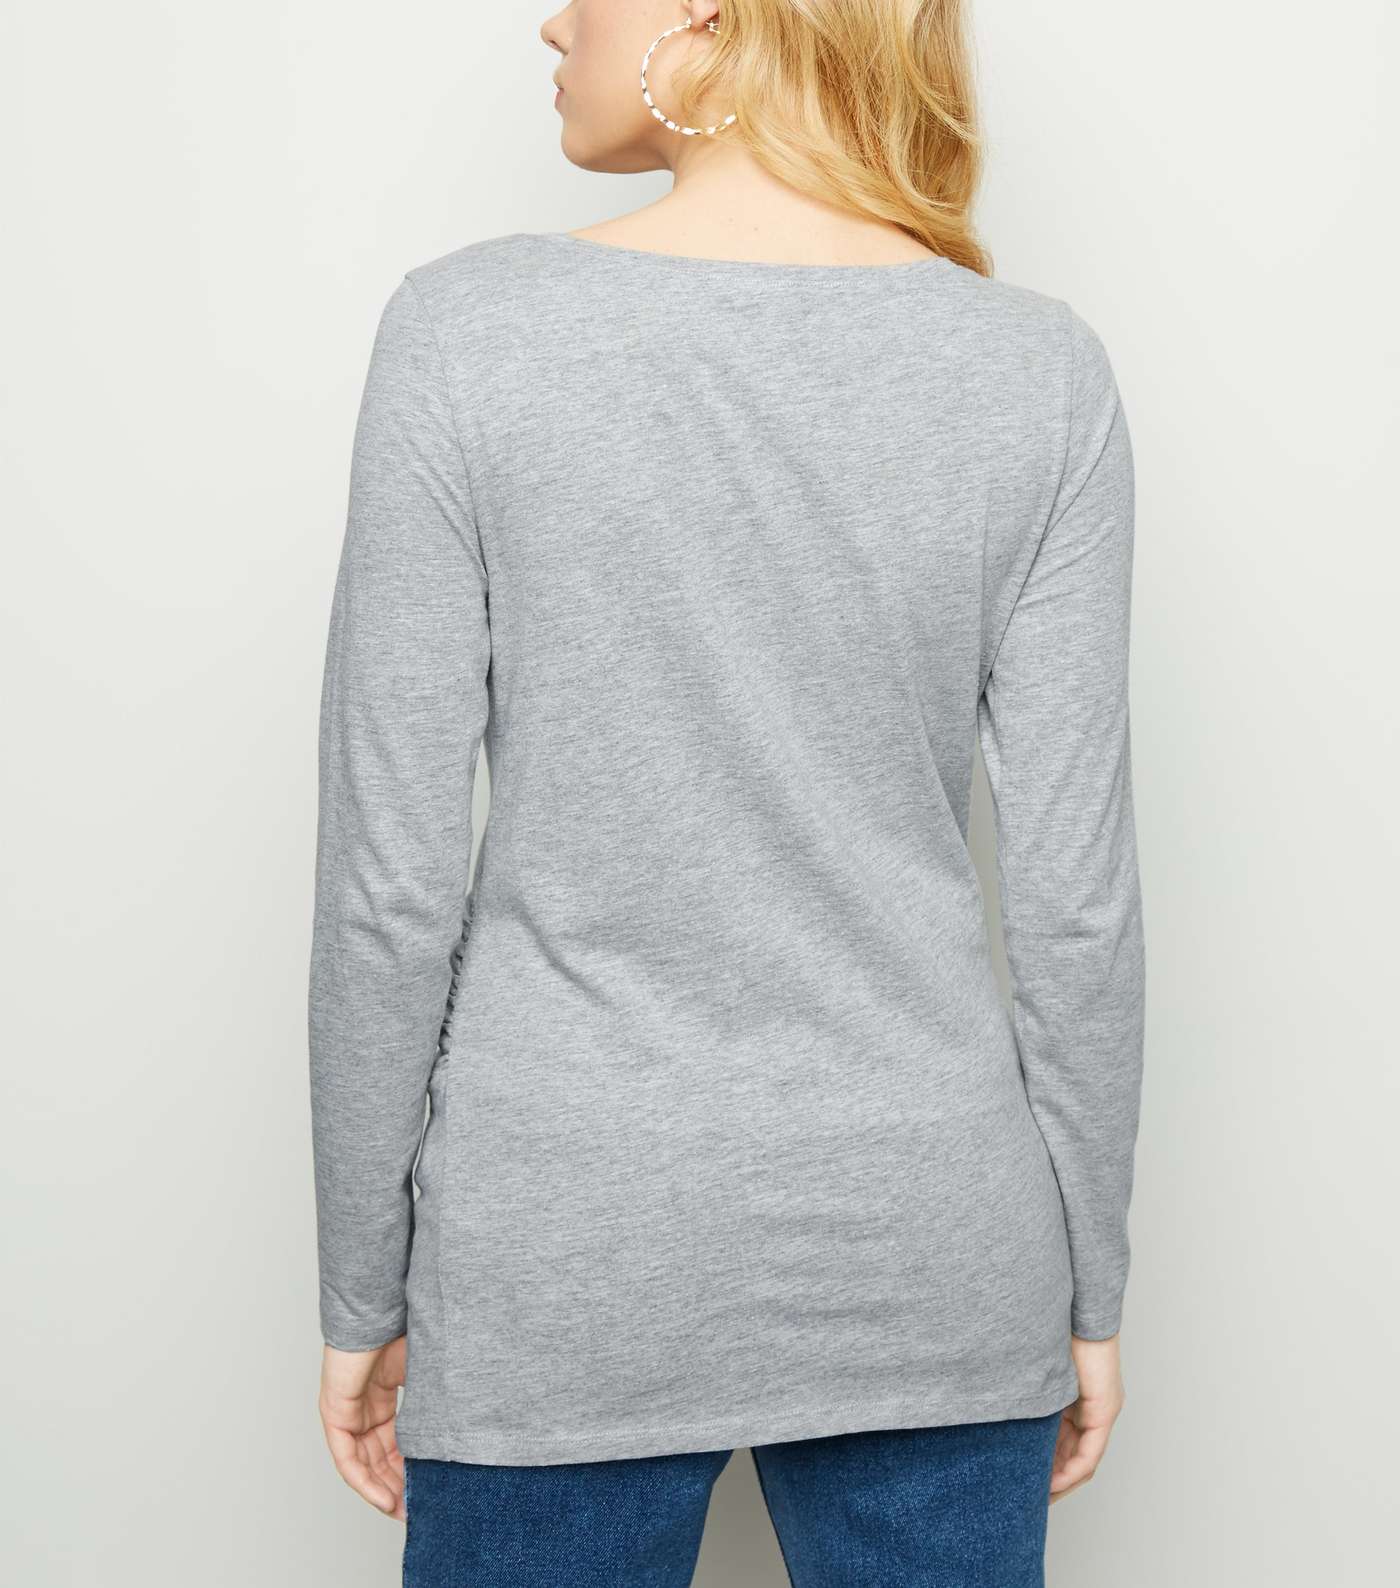 Maternity Pale Grey Long Sleeve Top Image 3